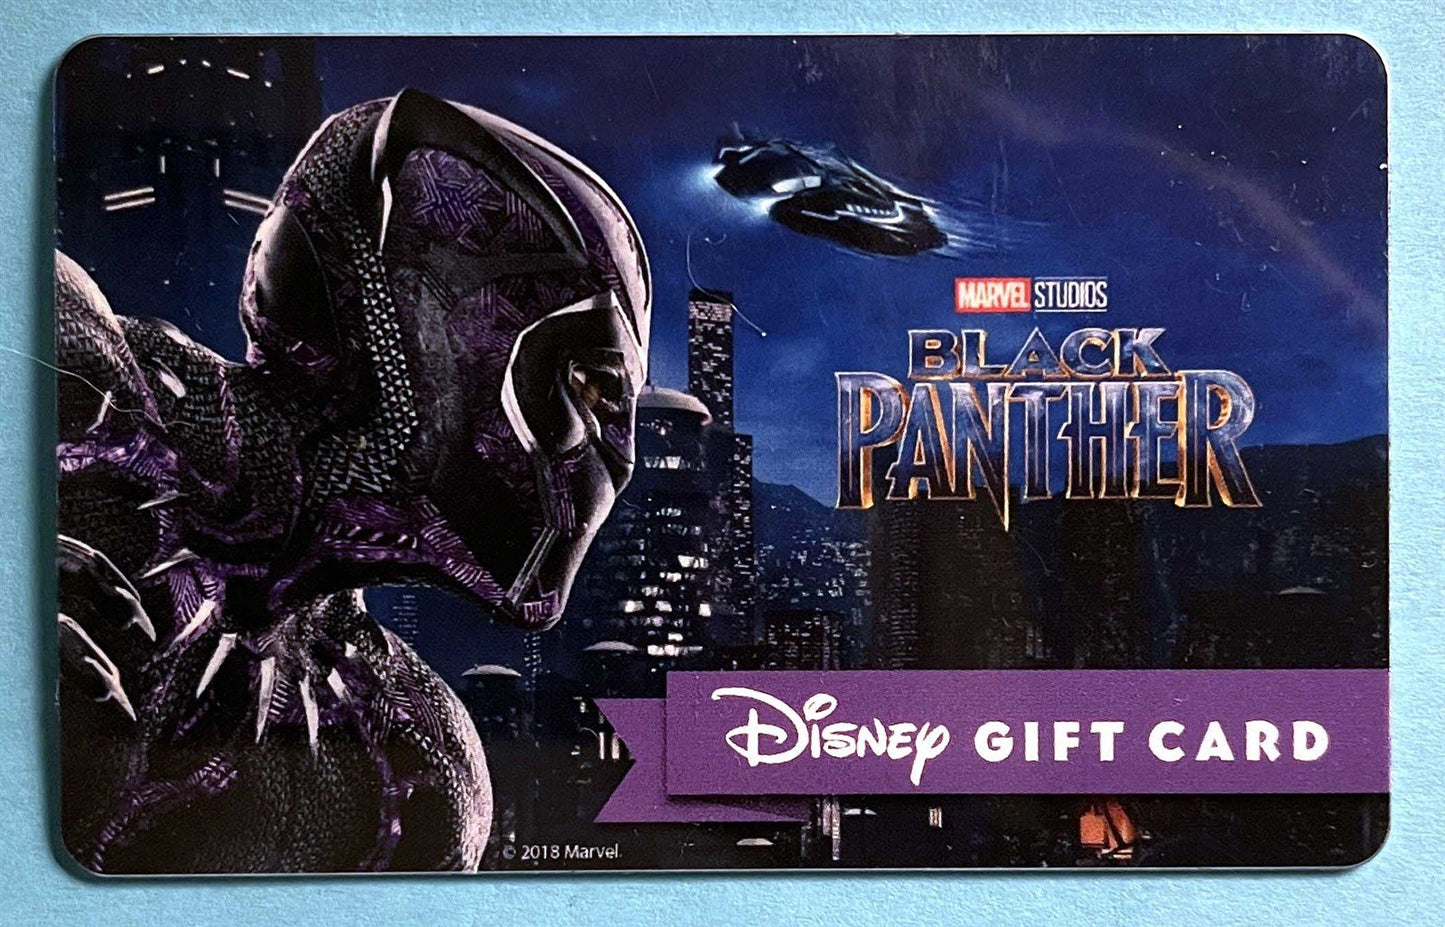 Marvel BLACK PANTHER collectible gift card Disney Theme Parks